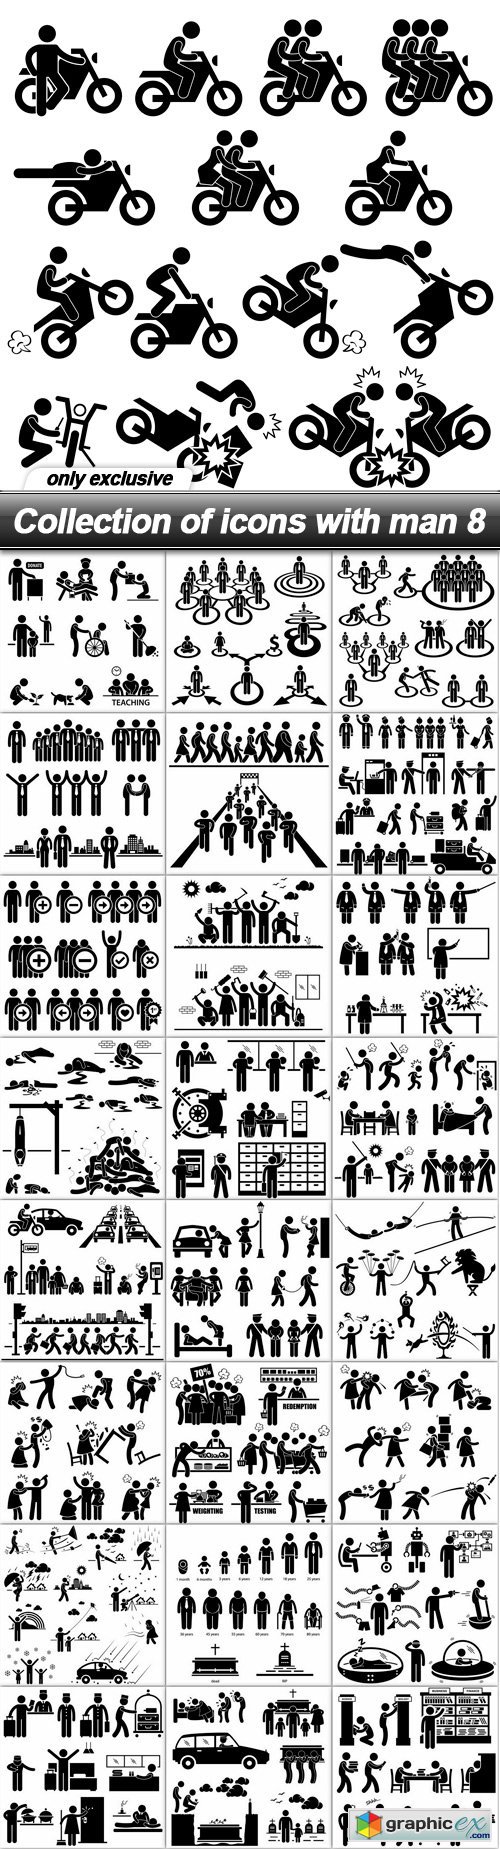 Collection of icons with man 8 - 25 EPS